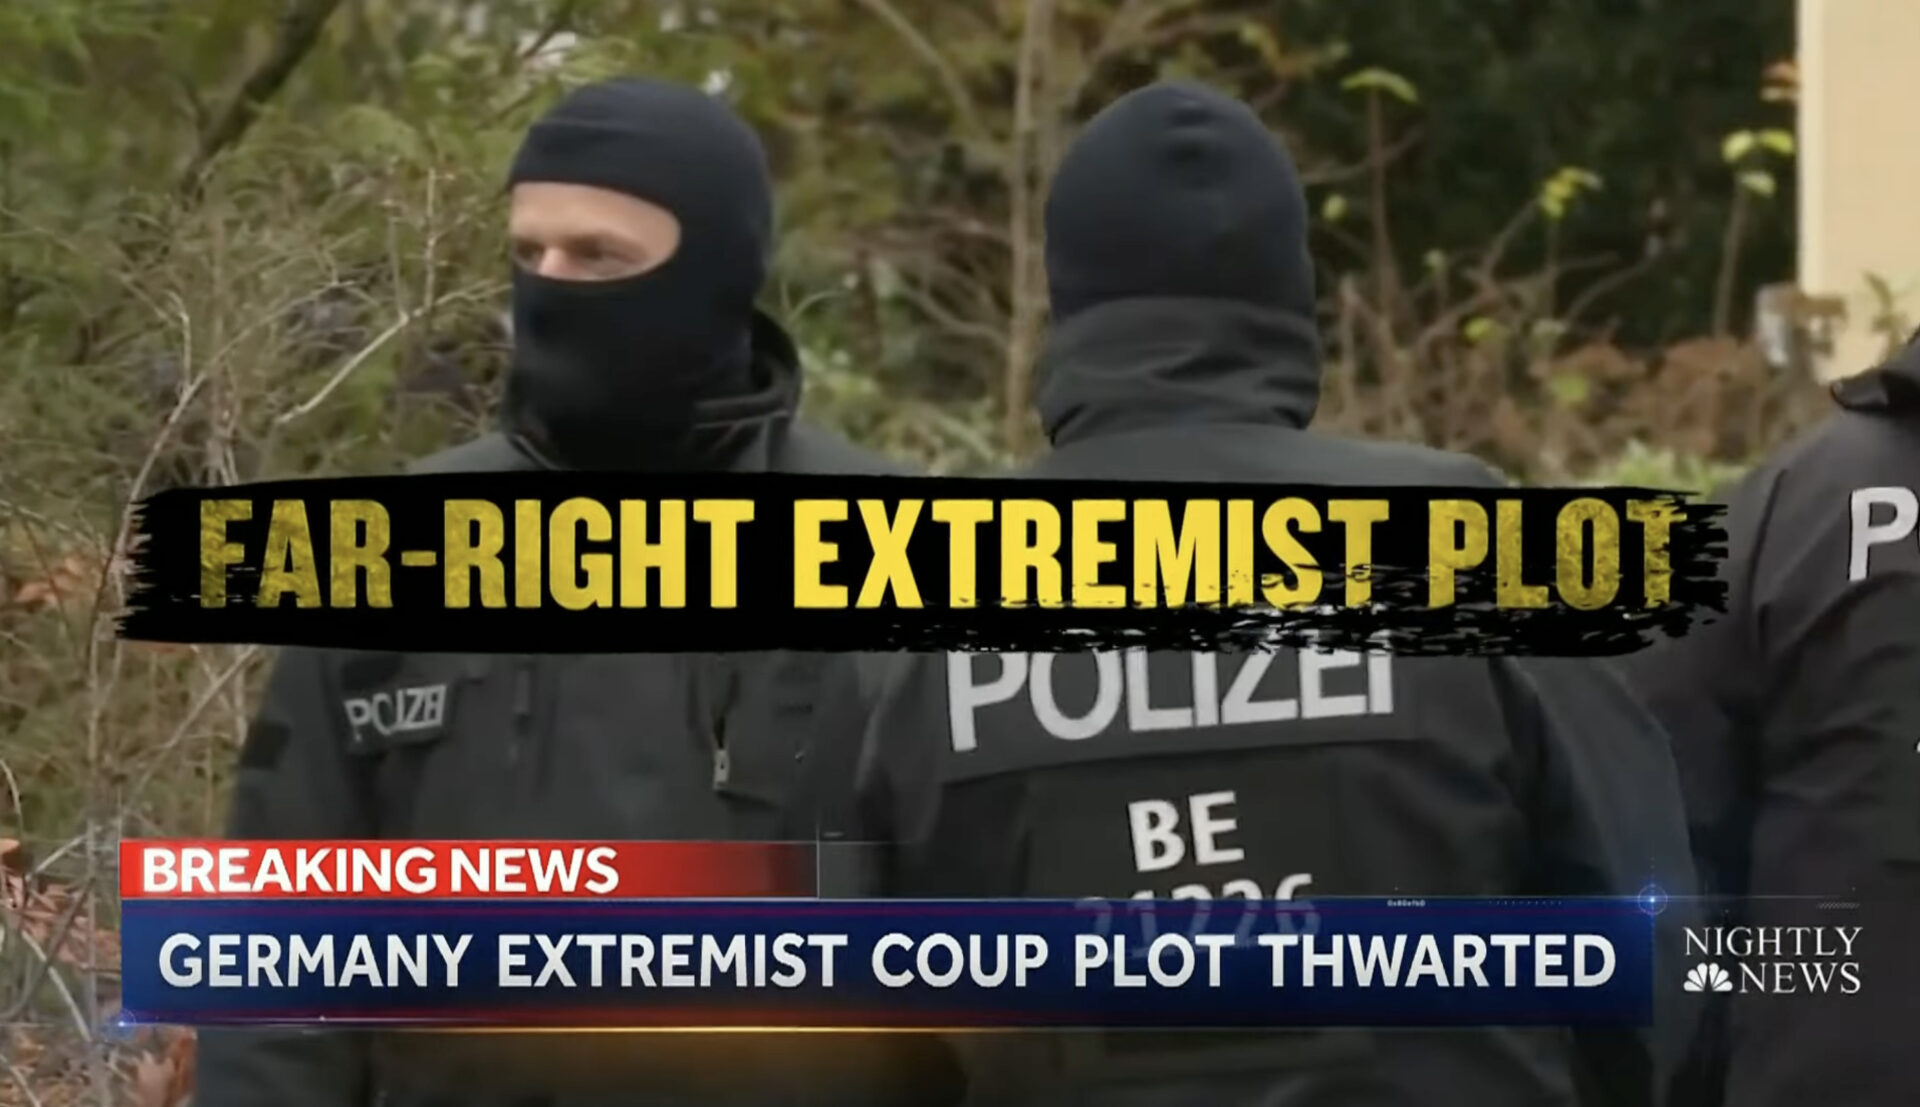 Germany extremist coup plot thwarted